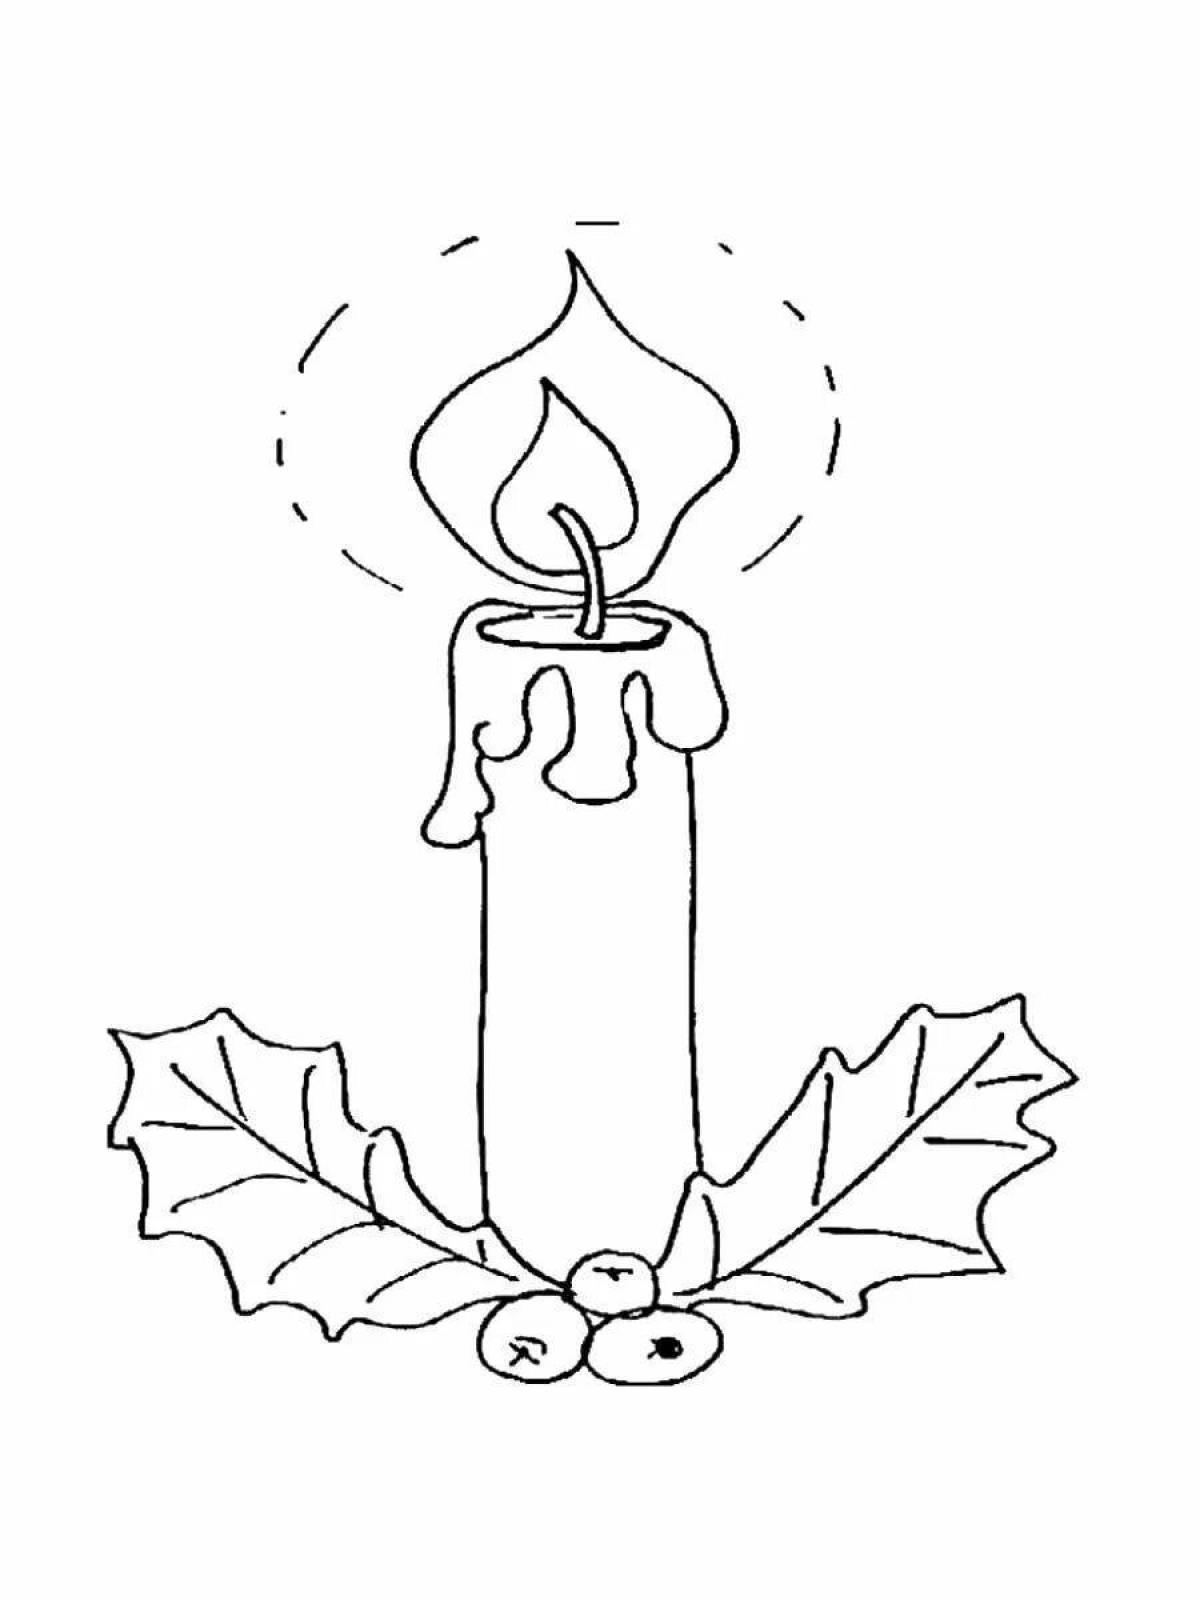 Gorgeous Christmas candle coloring book